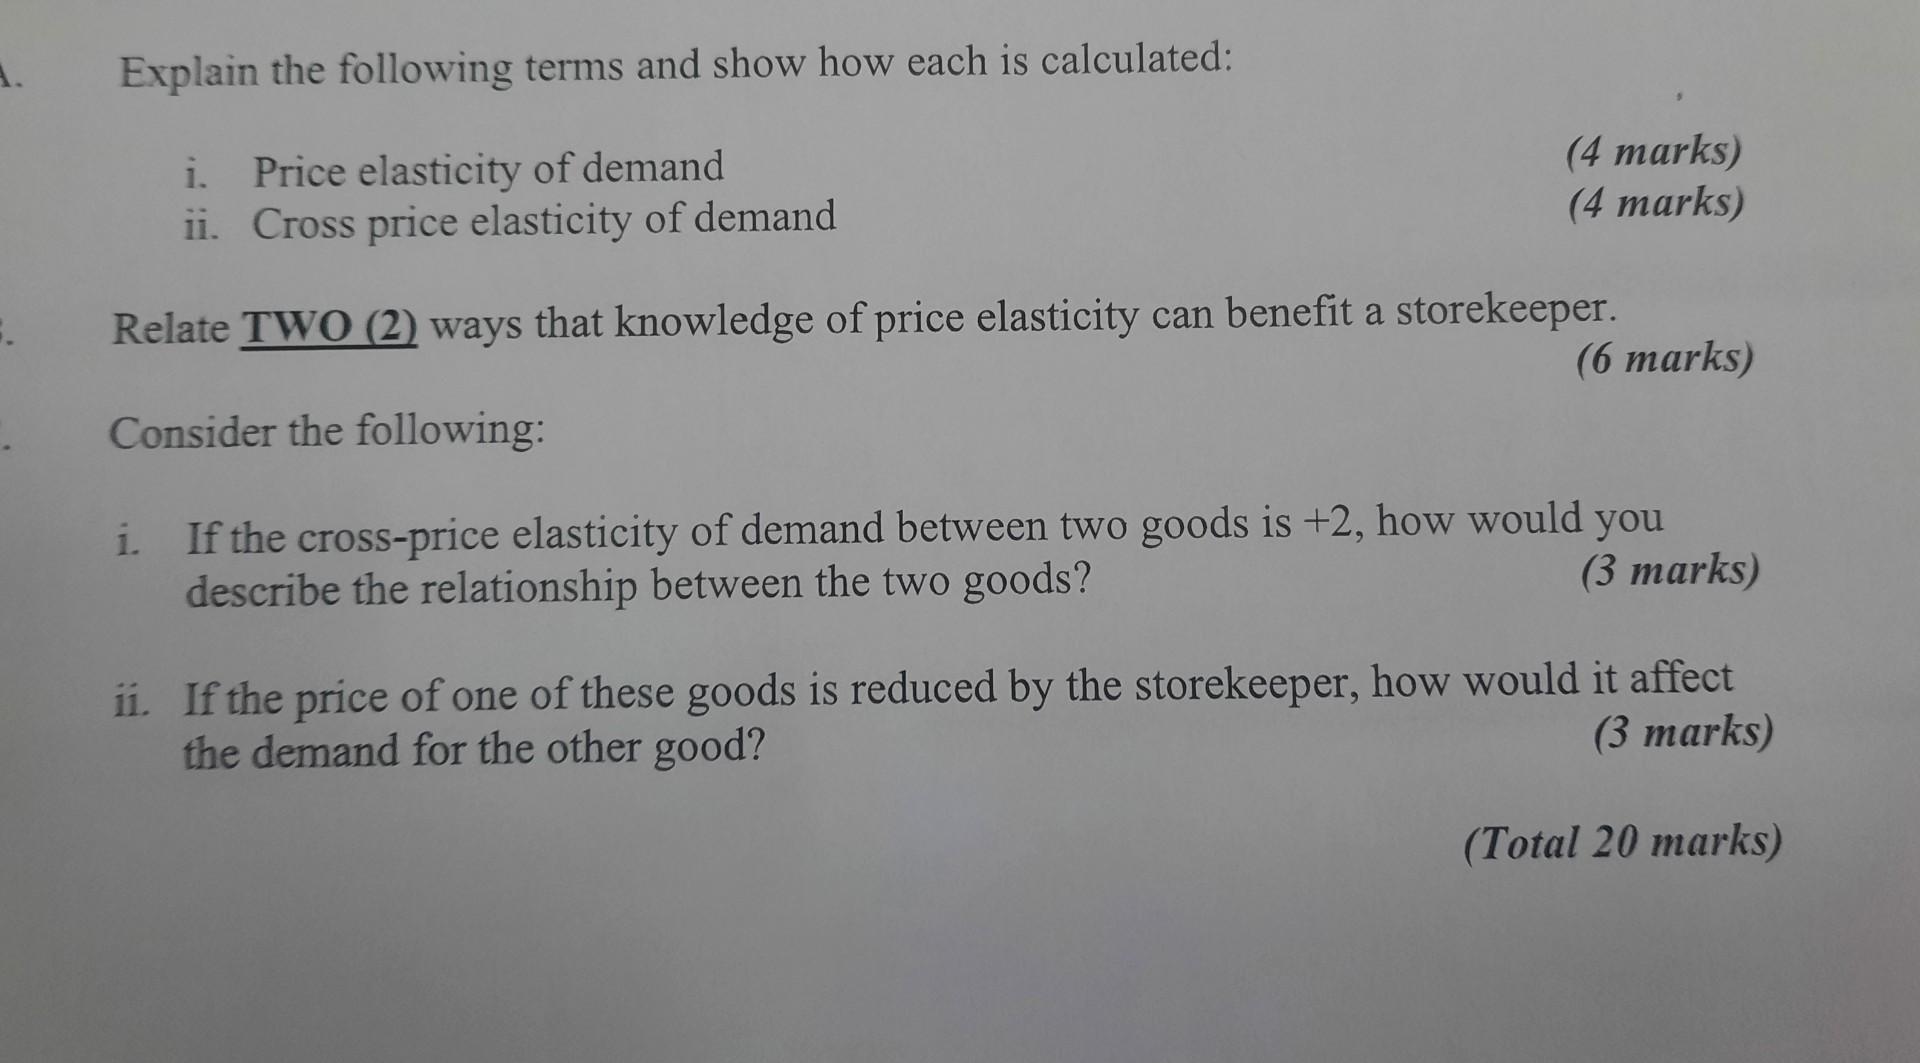 Explain the following terms and show how each is calculated:
i. Price elasticity of demand
(4 marks)
ii. Cross price elastici